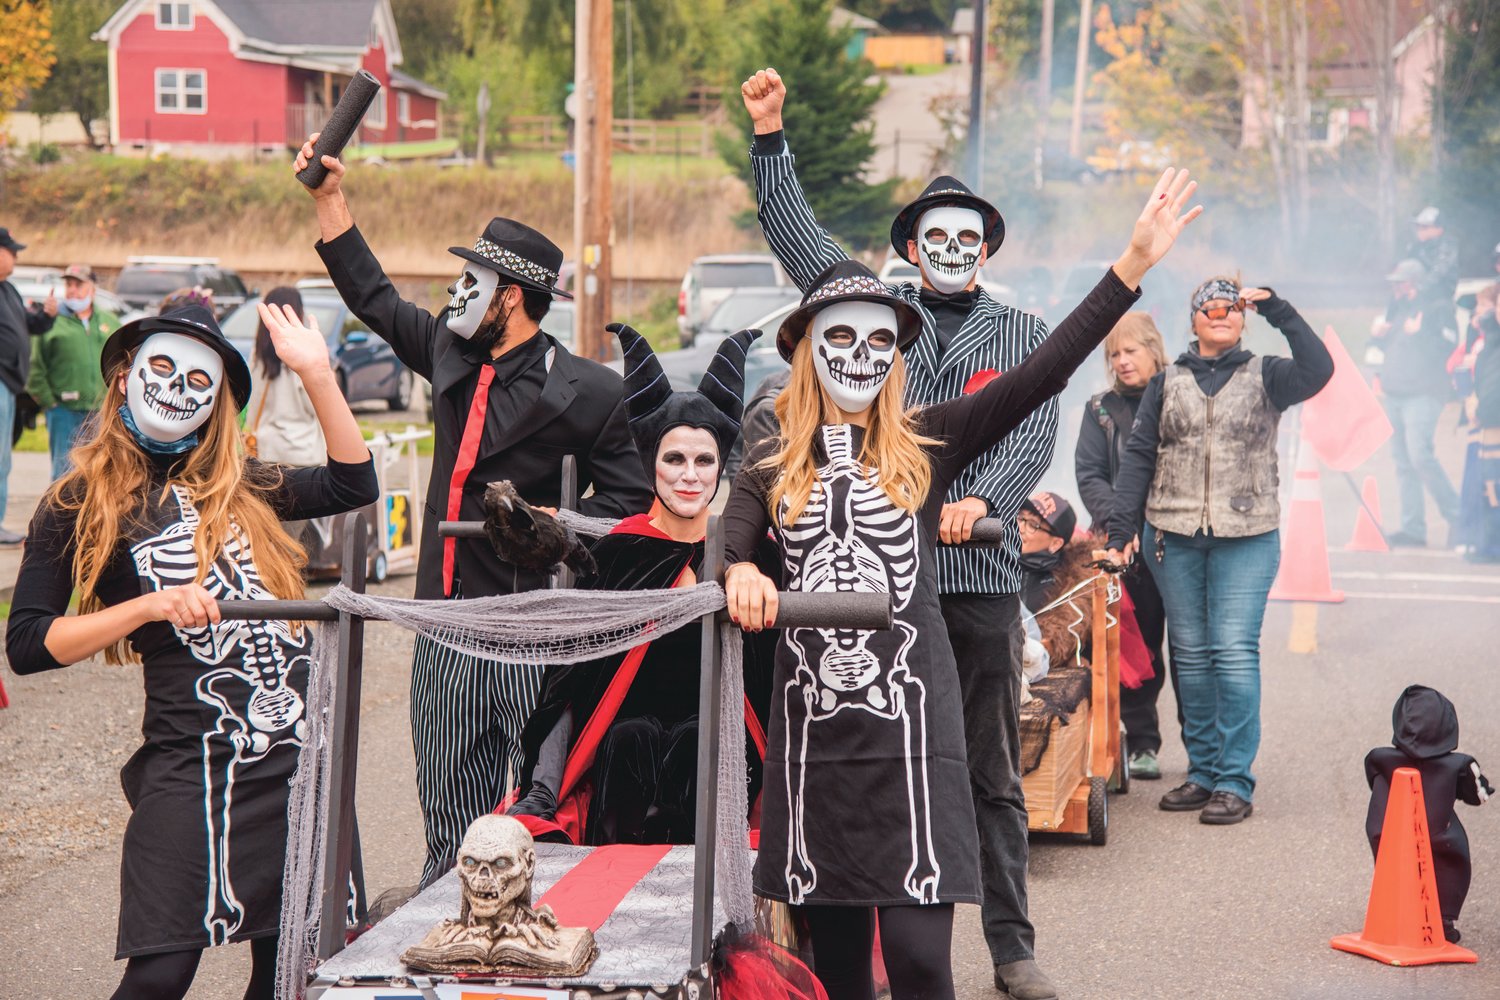 Olympia Mayor Cheryl Selby, riding center dressed as Maleficent, along with her City of Olympia crewmates wave during the Casket Parade outside Bucoda Town Hall Saturday afternoon before receiving the best dressed award.